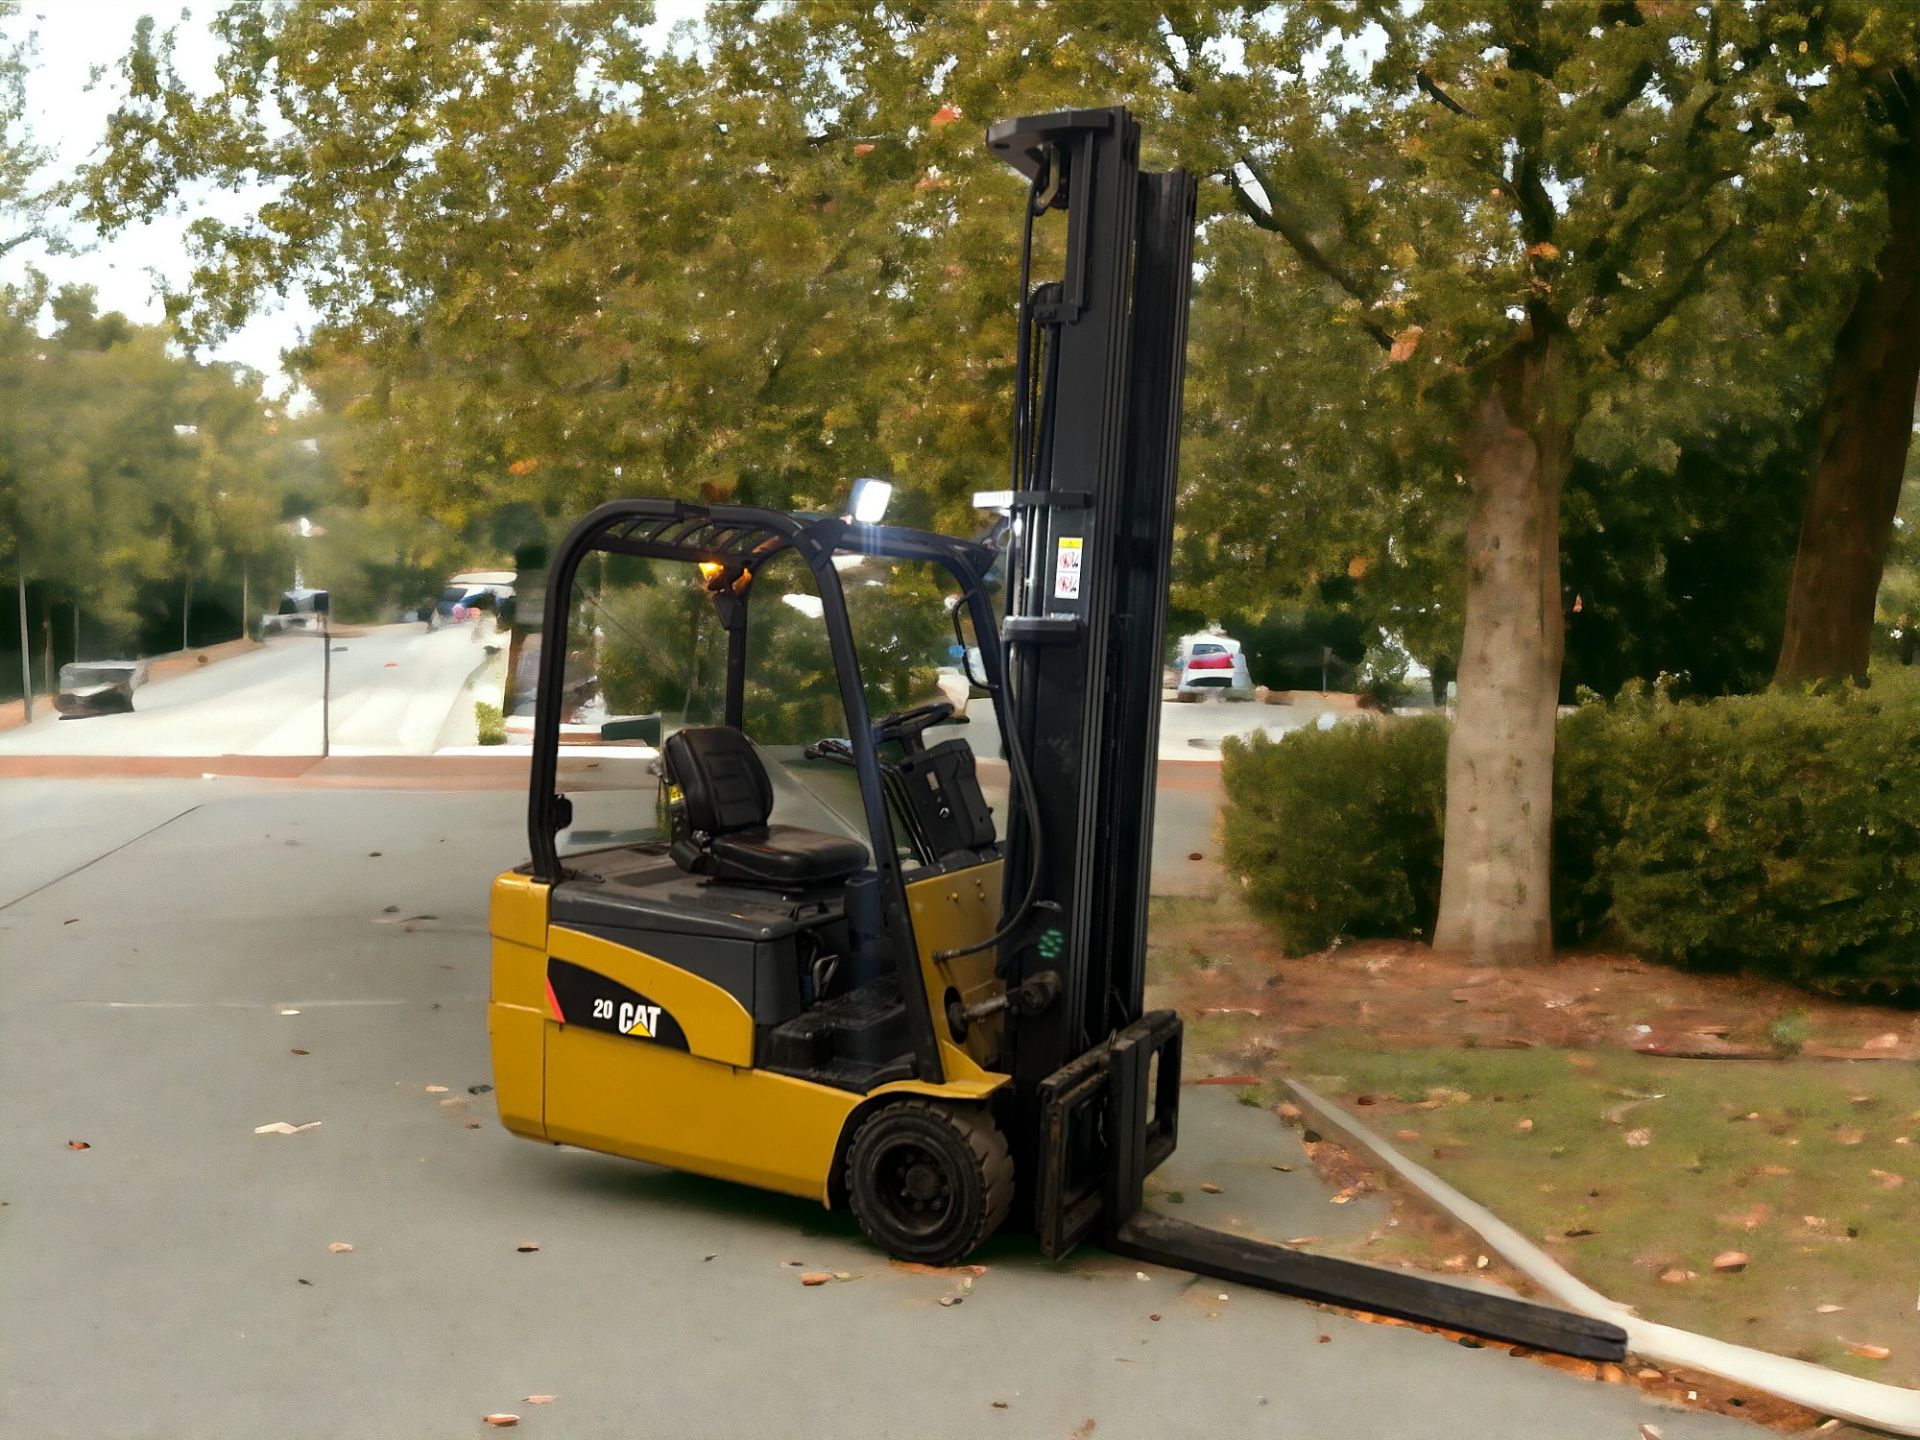 CAT LIFT TRUCKS ELECTRIC 3-WHEEL FORKLIFT - MODEL EP20NT (2008) **(INCLUDES CHARGER)** - Image 4 of 6